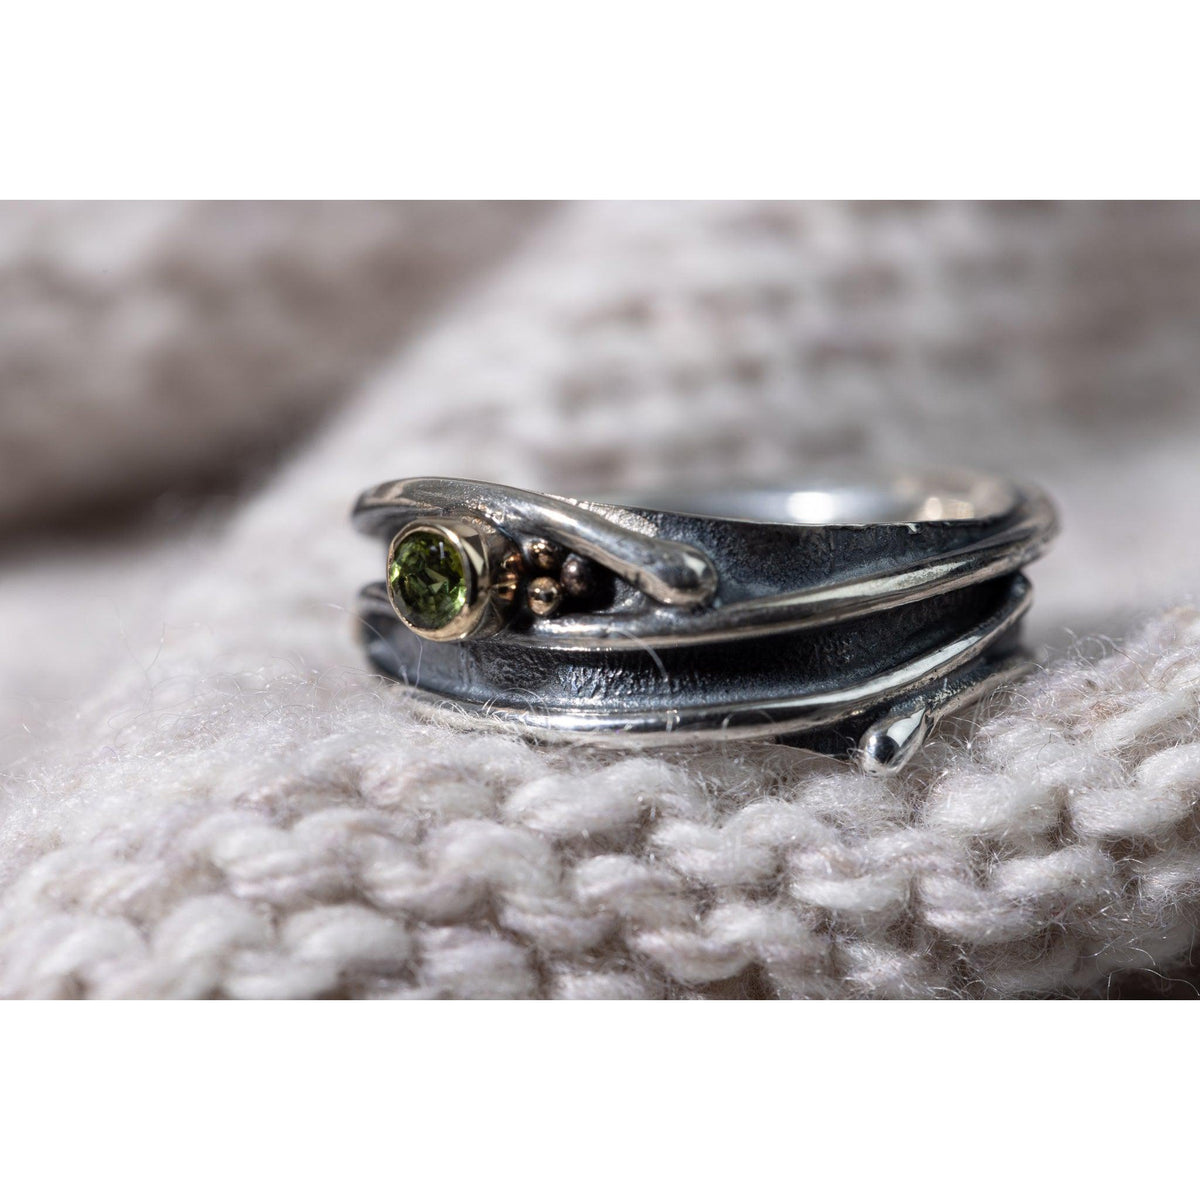 &#39;LG66 - Silver Ring with 9ct Gold 3.5mm Peridot Ring &#39; by Les Grimshaw, available at Padstow Gallery, Cornwall